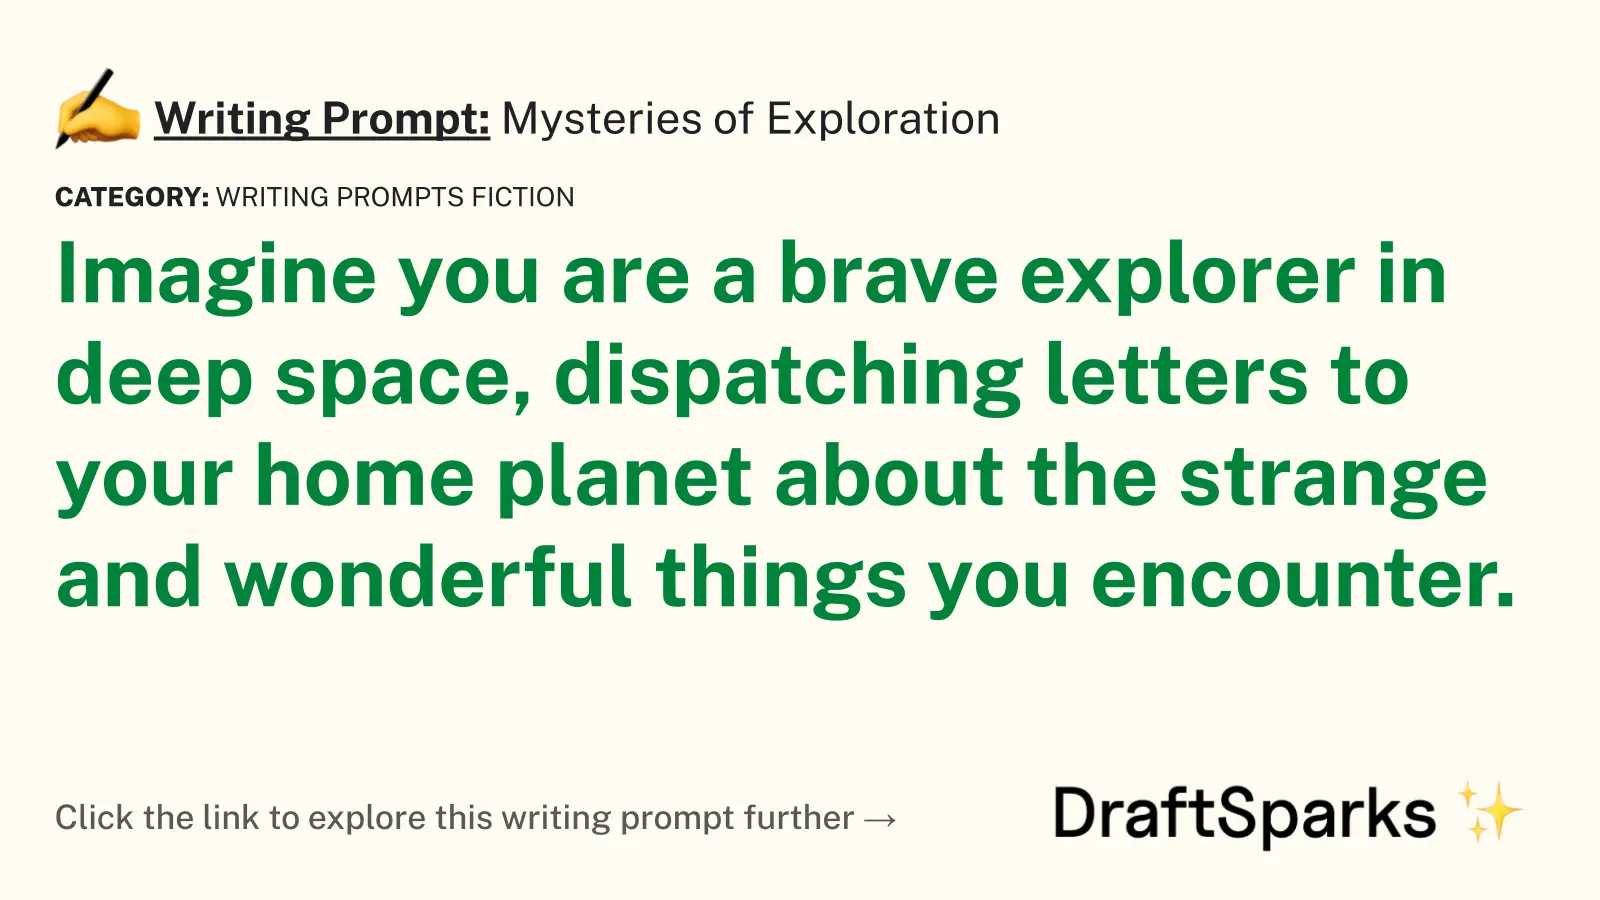 Mysteries of Exploration